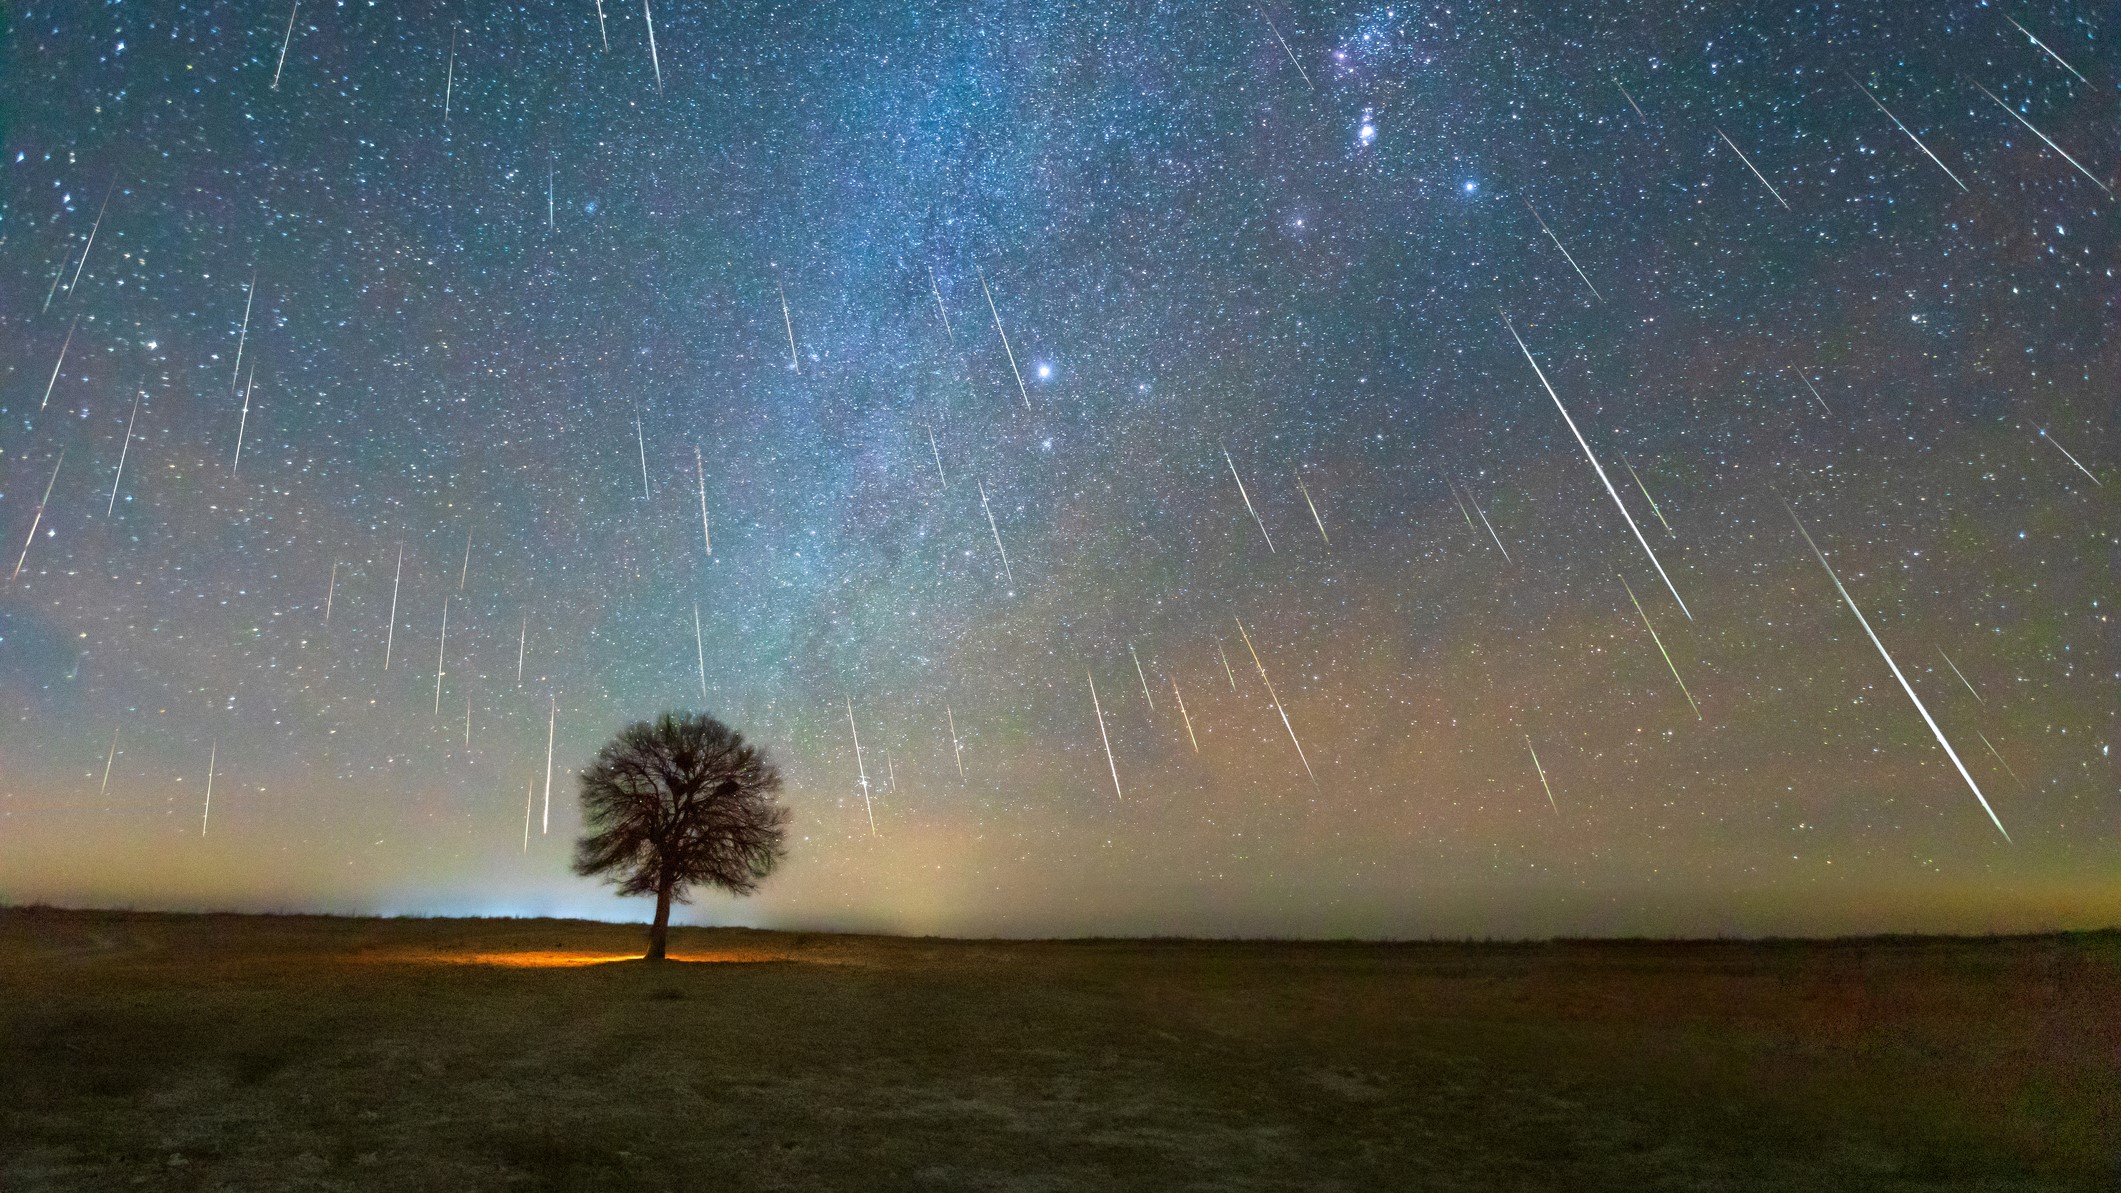 Geminid meteor shower with the silhouette of a tree in the foreground.